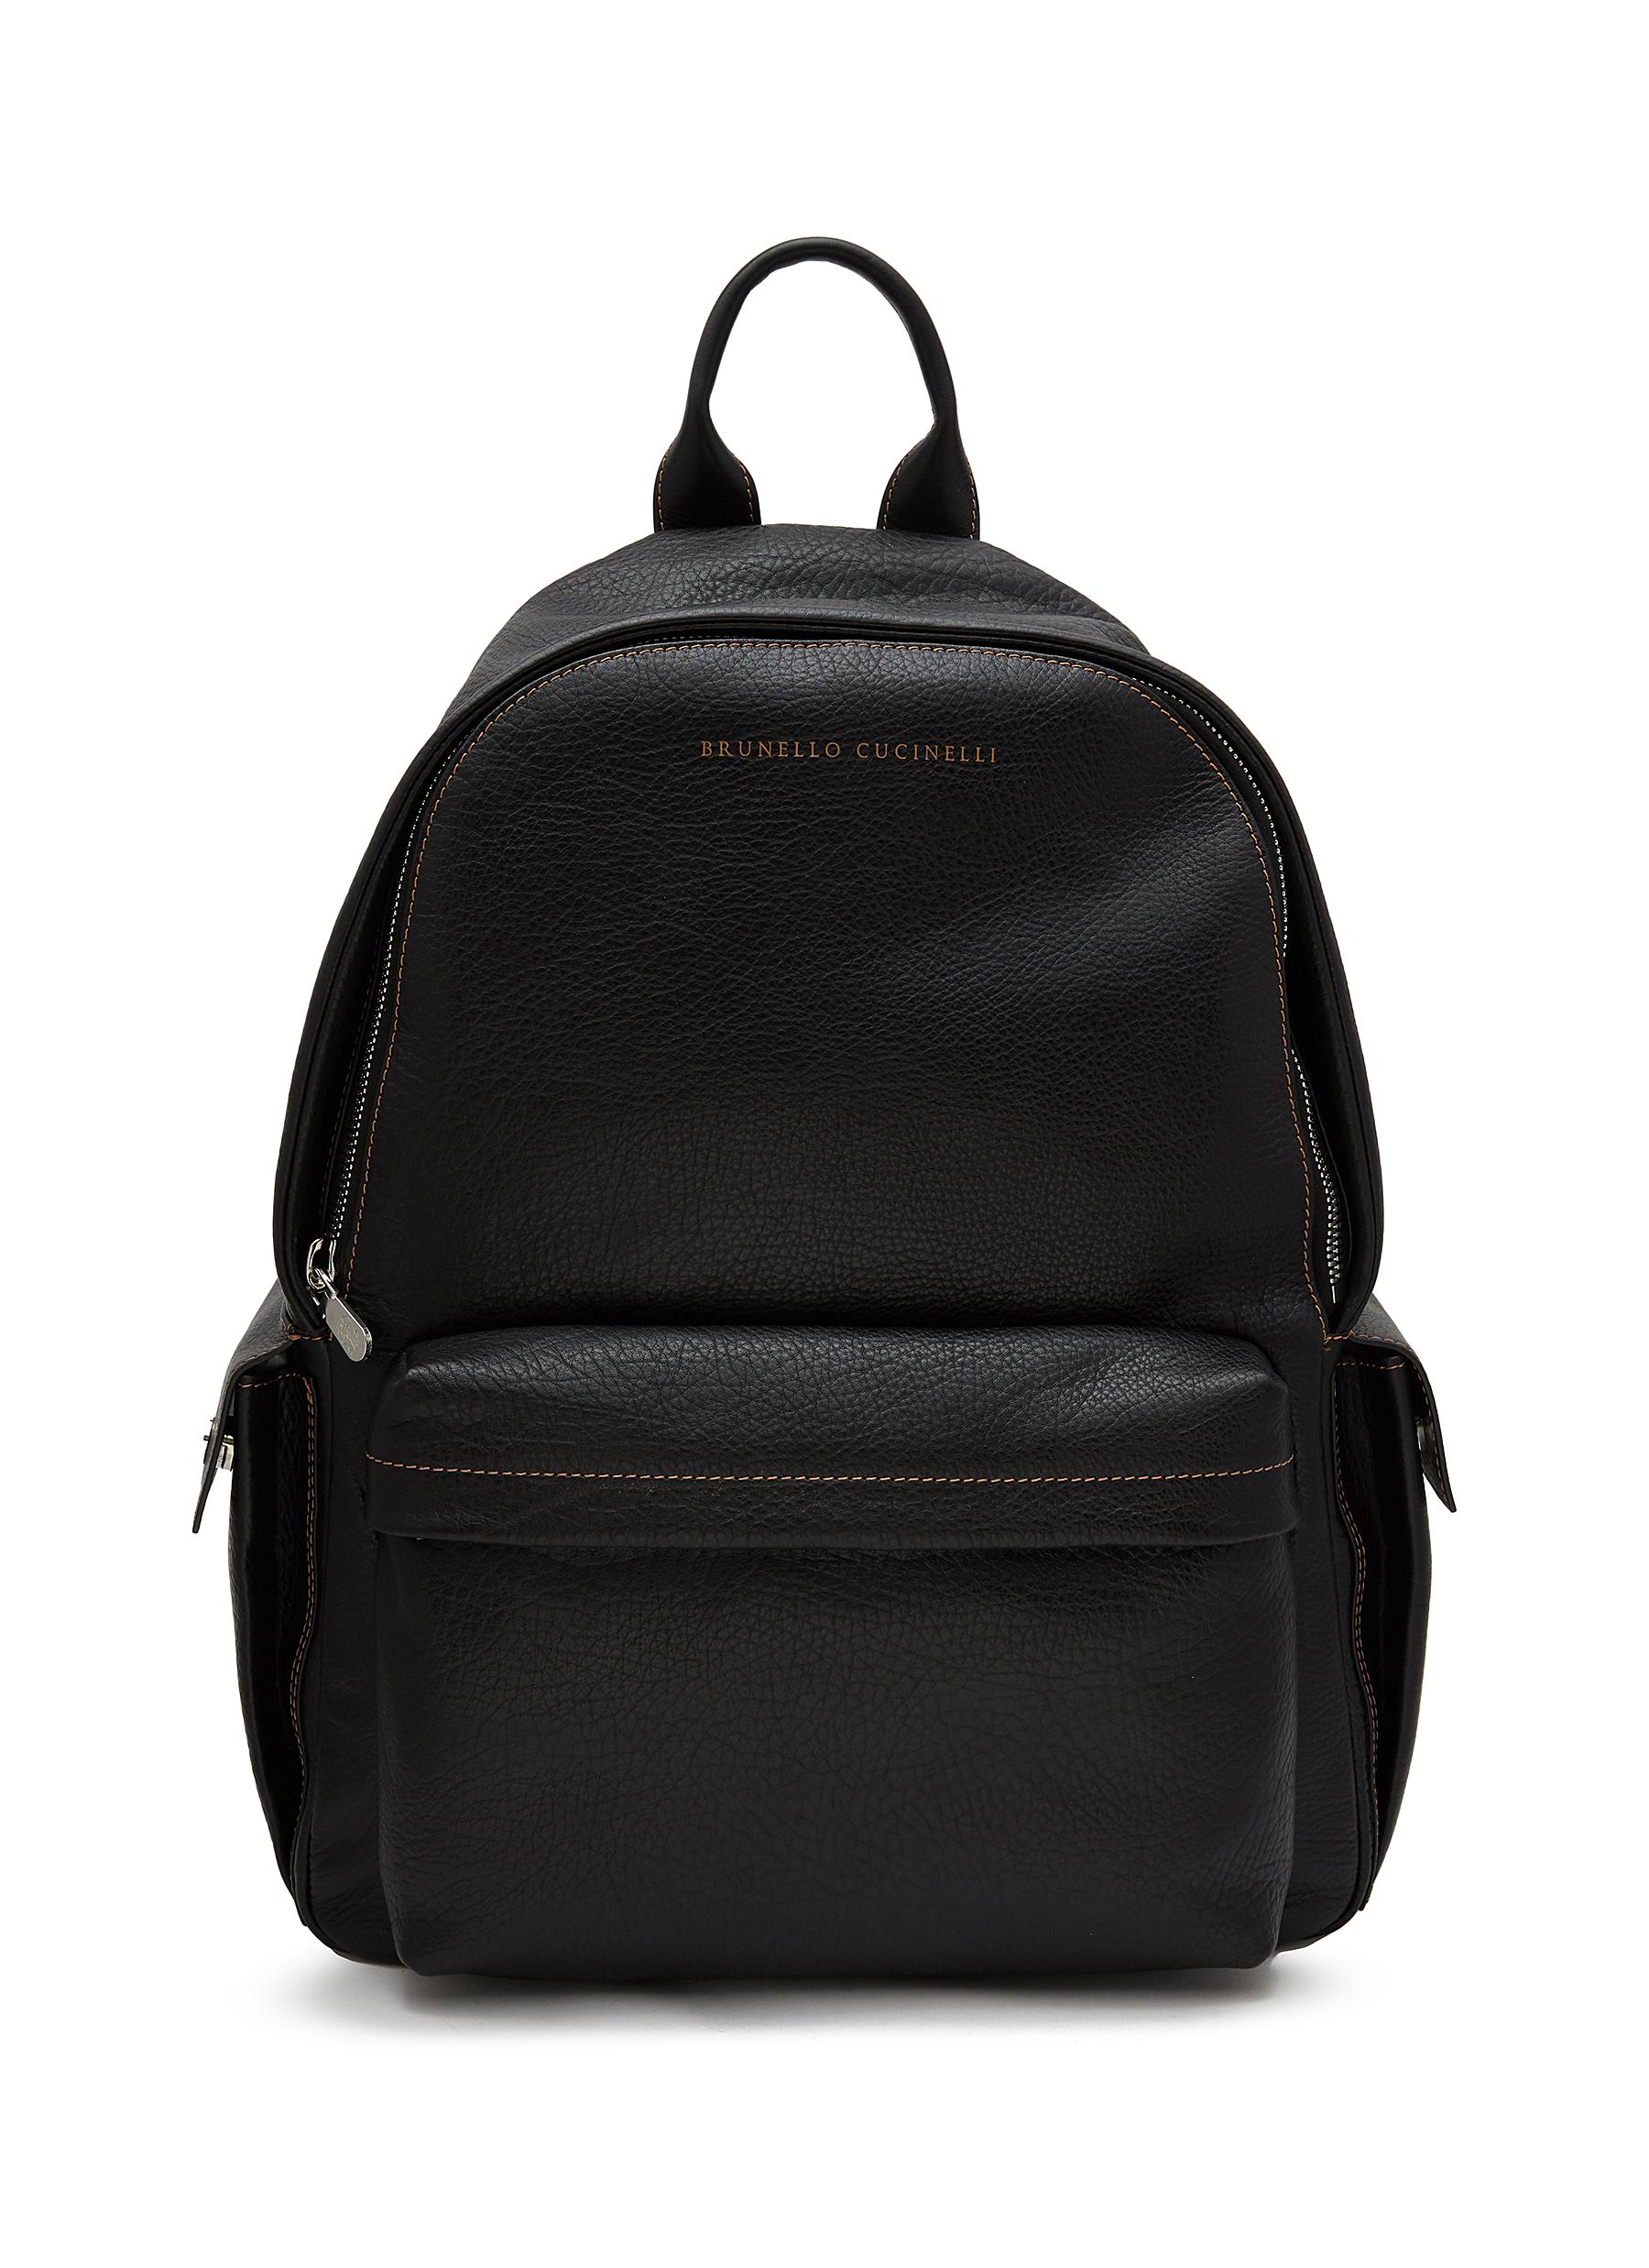 BRUNELLO CUCINELLI ZIPPED LEATHER BACKPACK